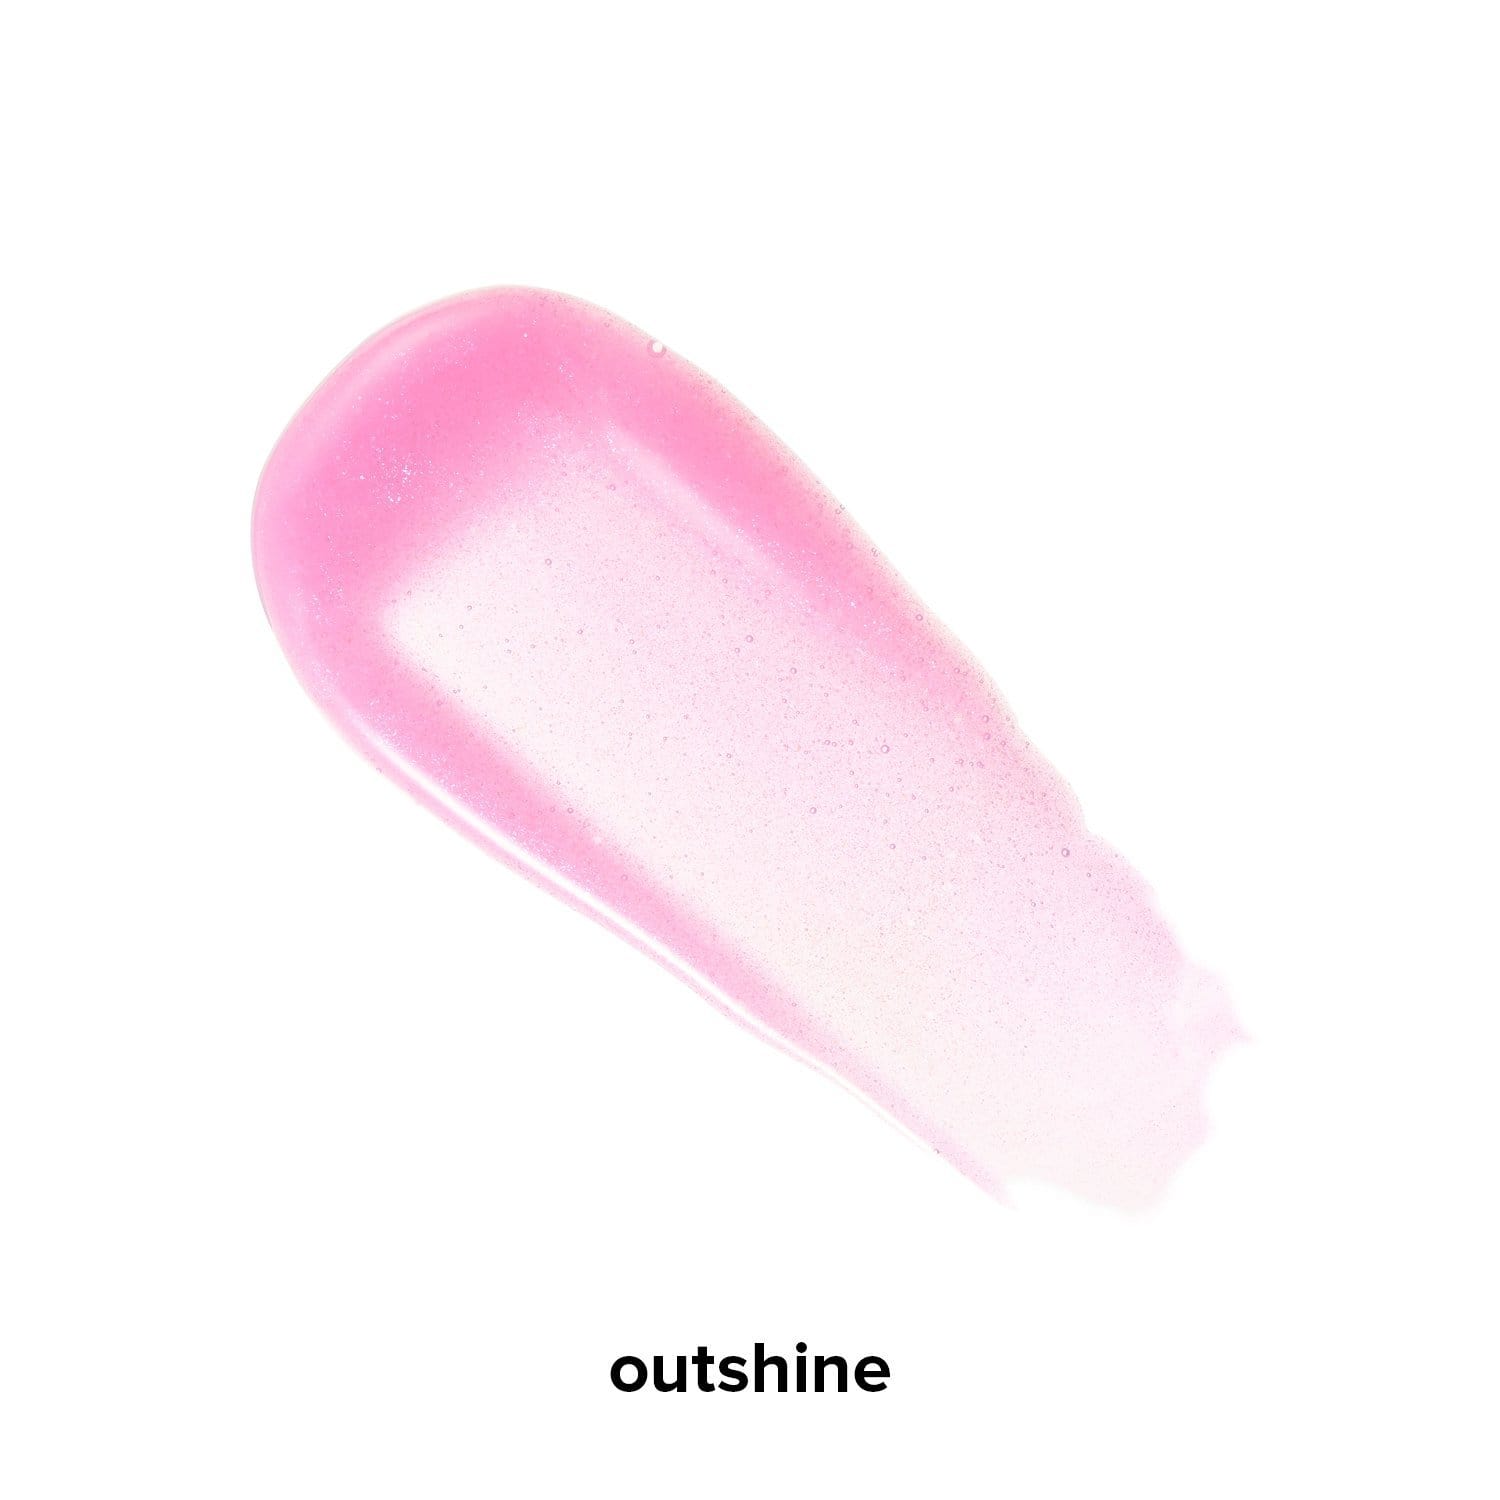 gloss'd Outshine - Shimmer Pink Makeup supercharged gloss oil